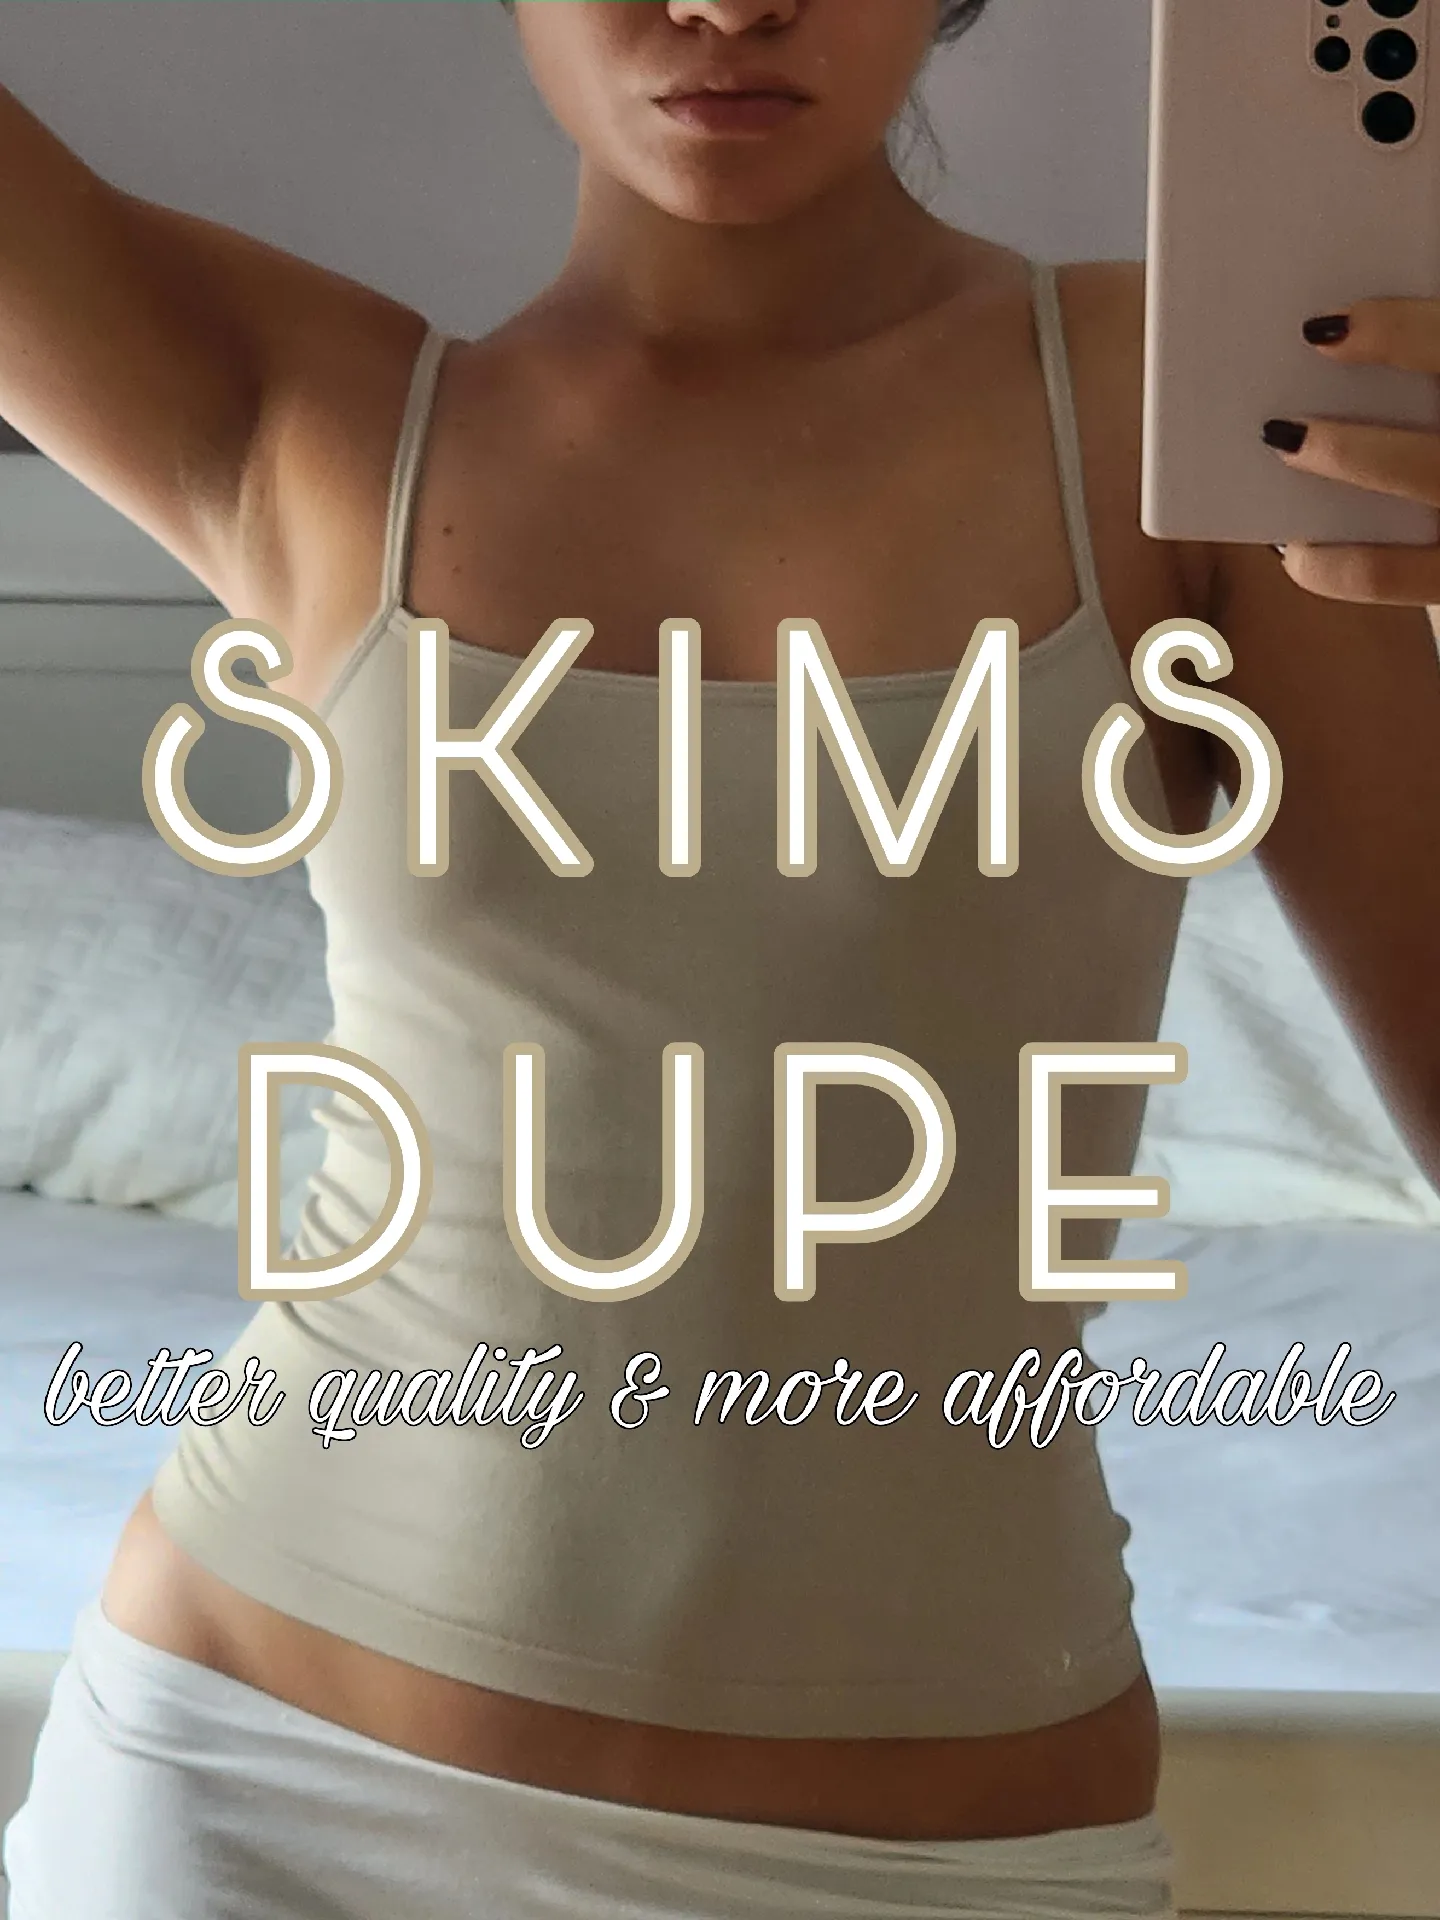 SKIMS dupe! better quality & more affordable 🎀, Gallery posted by Olga  Kontos